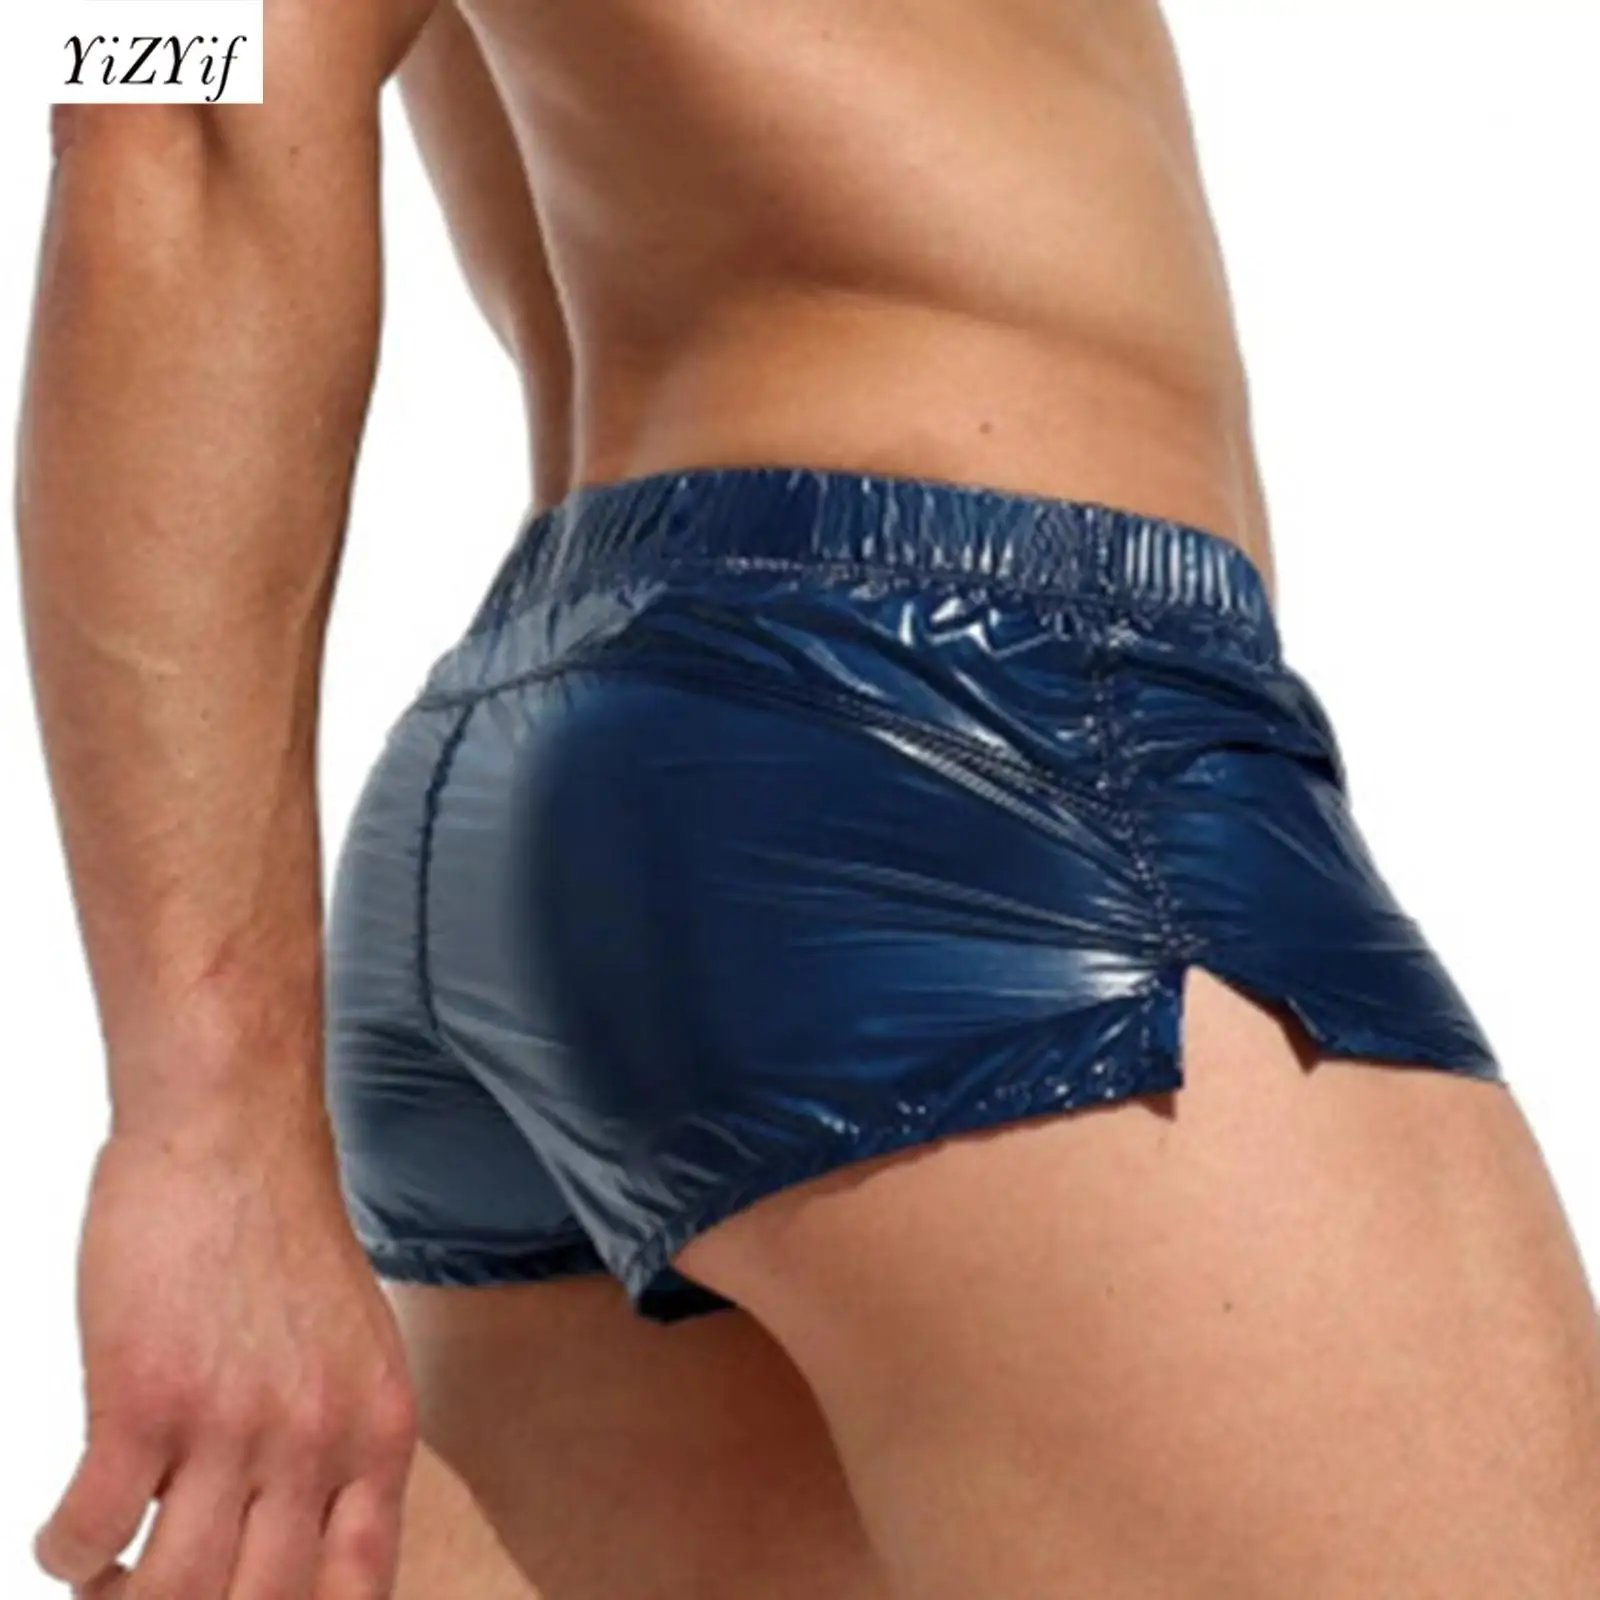 Mens Glossy Shorts Solid Color Low Rise Sides Slit Slim Fit Trunks Underpants Beach Pool Night Club Party Shorts Boxer Clubwear fyxljj men s pu leather short sleeve t shirt clothes sets sexy leather t shirt boxer shorts men stage party clubwear undershirt